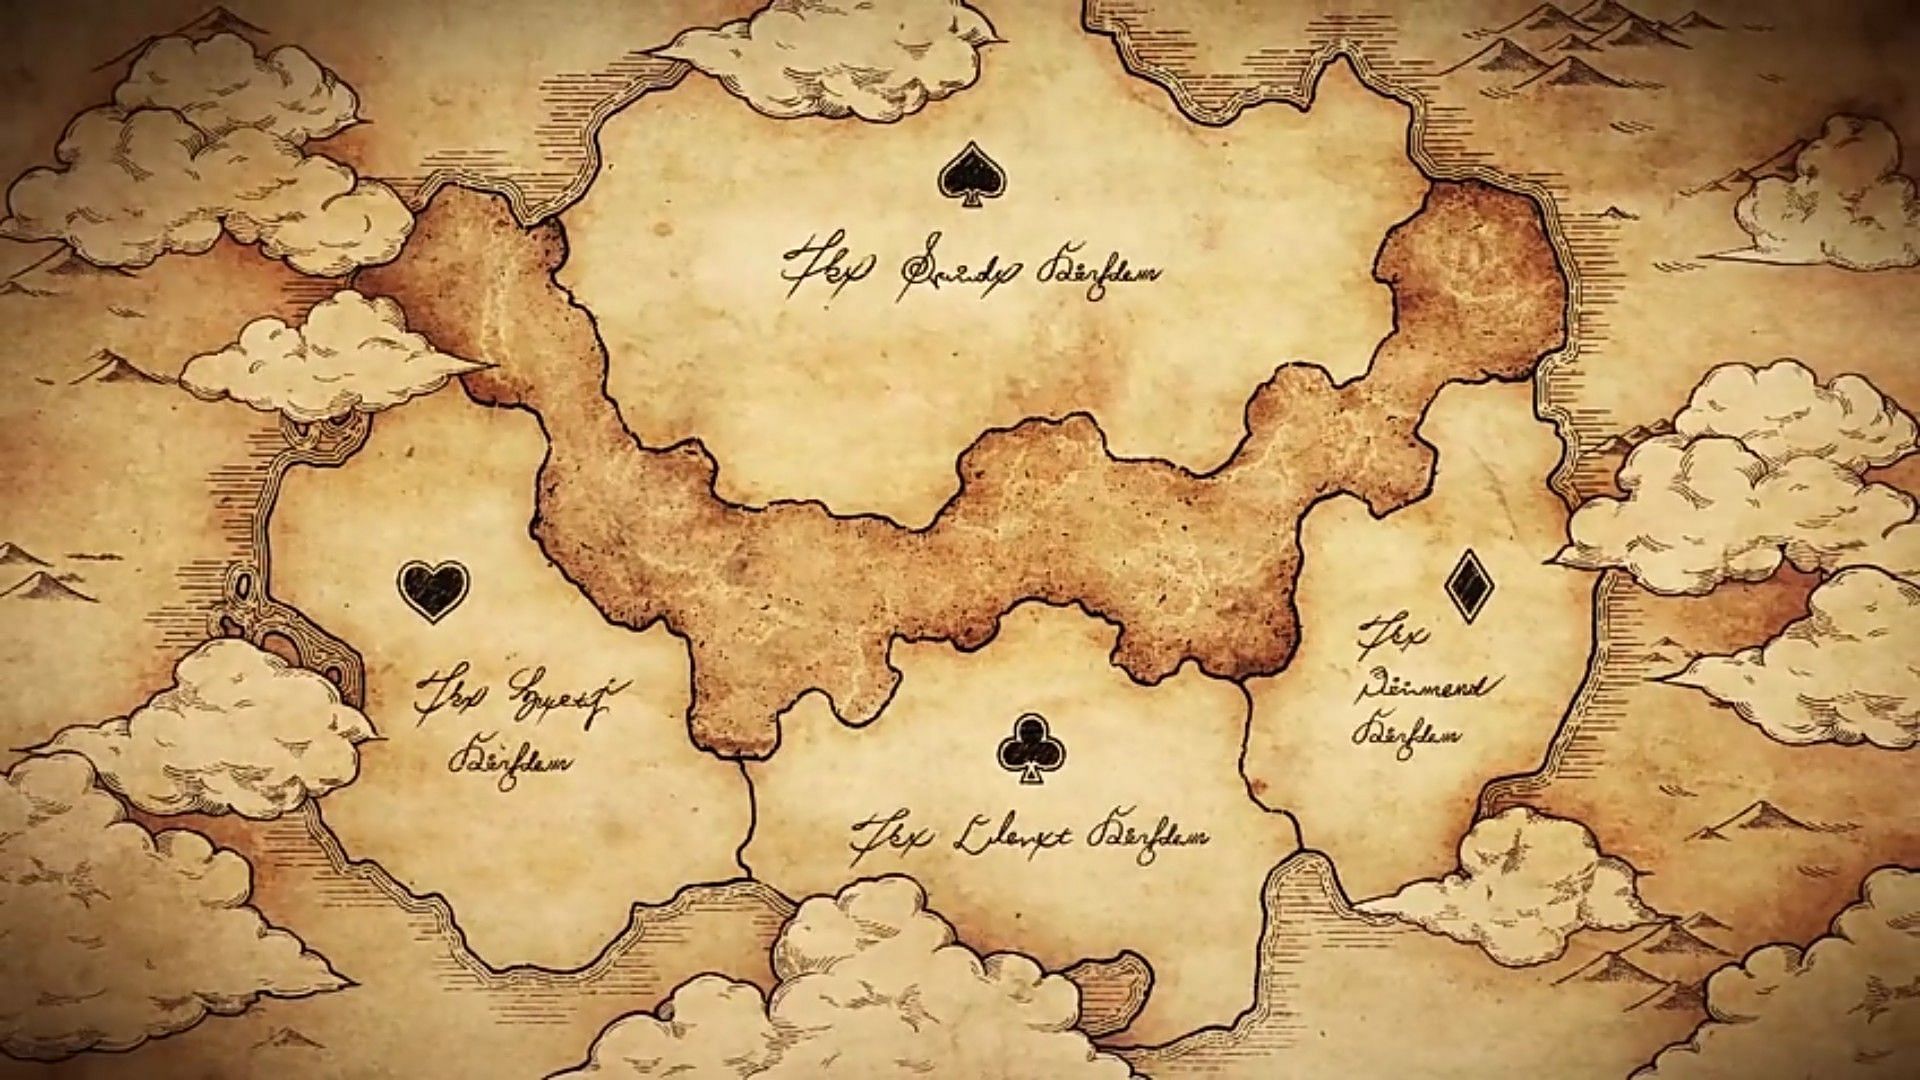 The Black Clover world map as seen in the series